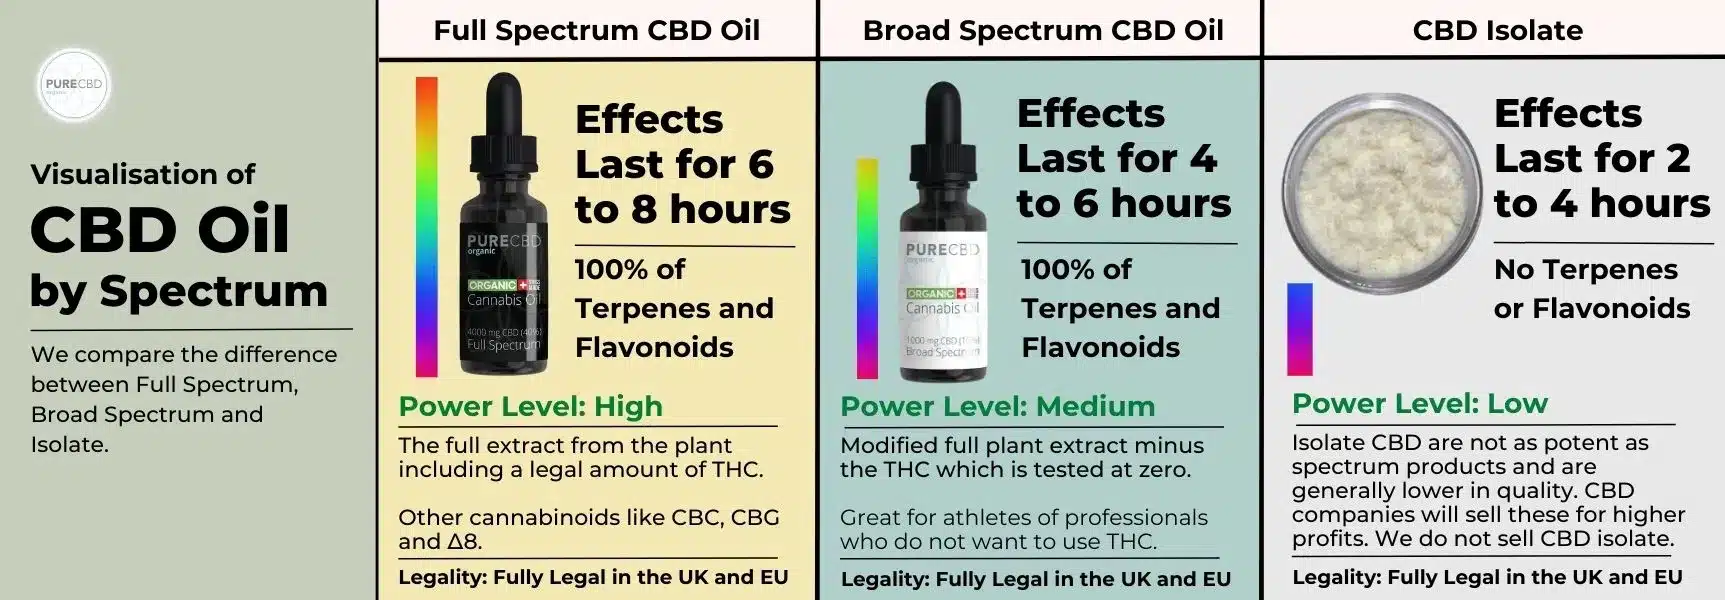 a visualisation of the difference between CBD types. There is Full Spectrum CBD oil as well as broad and cbd isolate. This infographic gives insight into the power of each type with full spectrum being the most powerful and broad spectrum having a medium strength level. CBD isolate is considered the weakest.